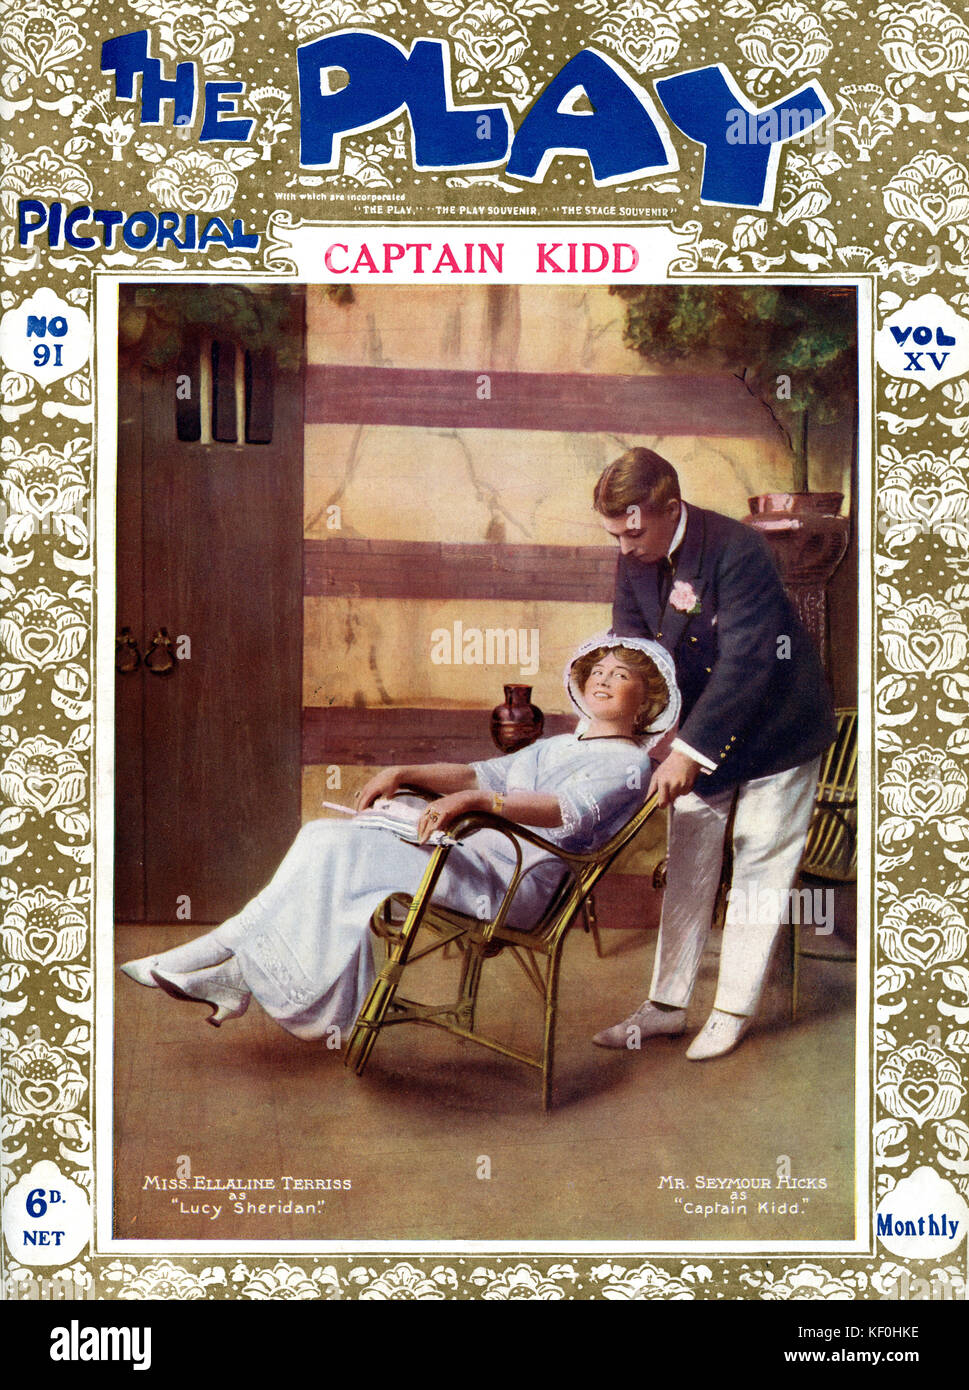 'Captain Kidd' by Seymour Hicks, with Seymour Hicks as Captain Kidd (30 January 1871 – 6 April 1949) and Ellaline Terriss as Lucy Sheridan (13 April 1872 – 16 June 1971). London. Cover of Play Pictorial, 1910. Stock Photo